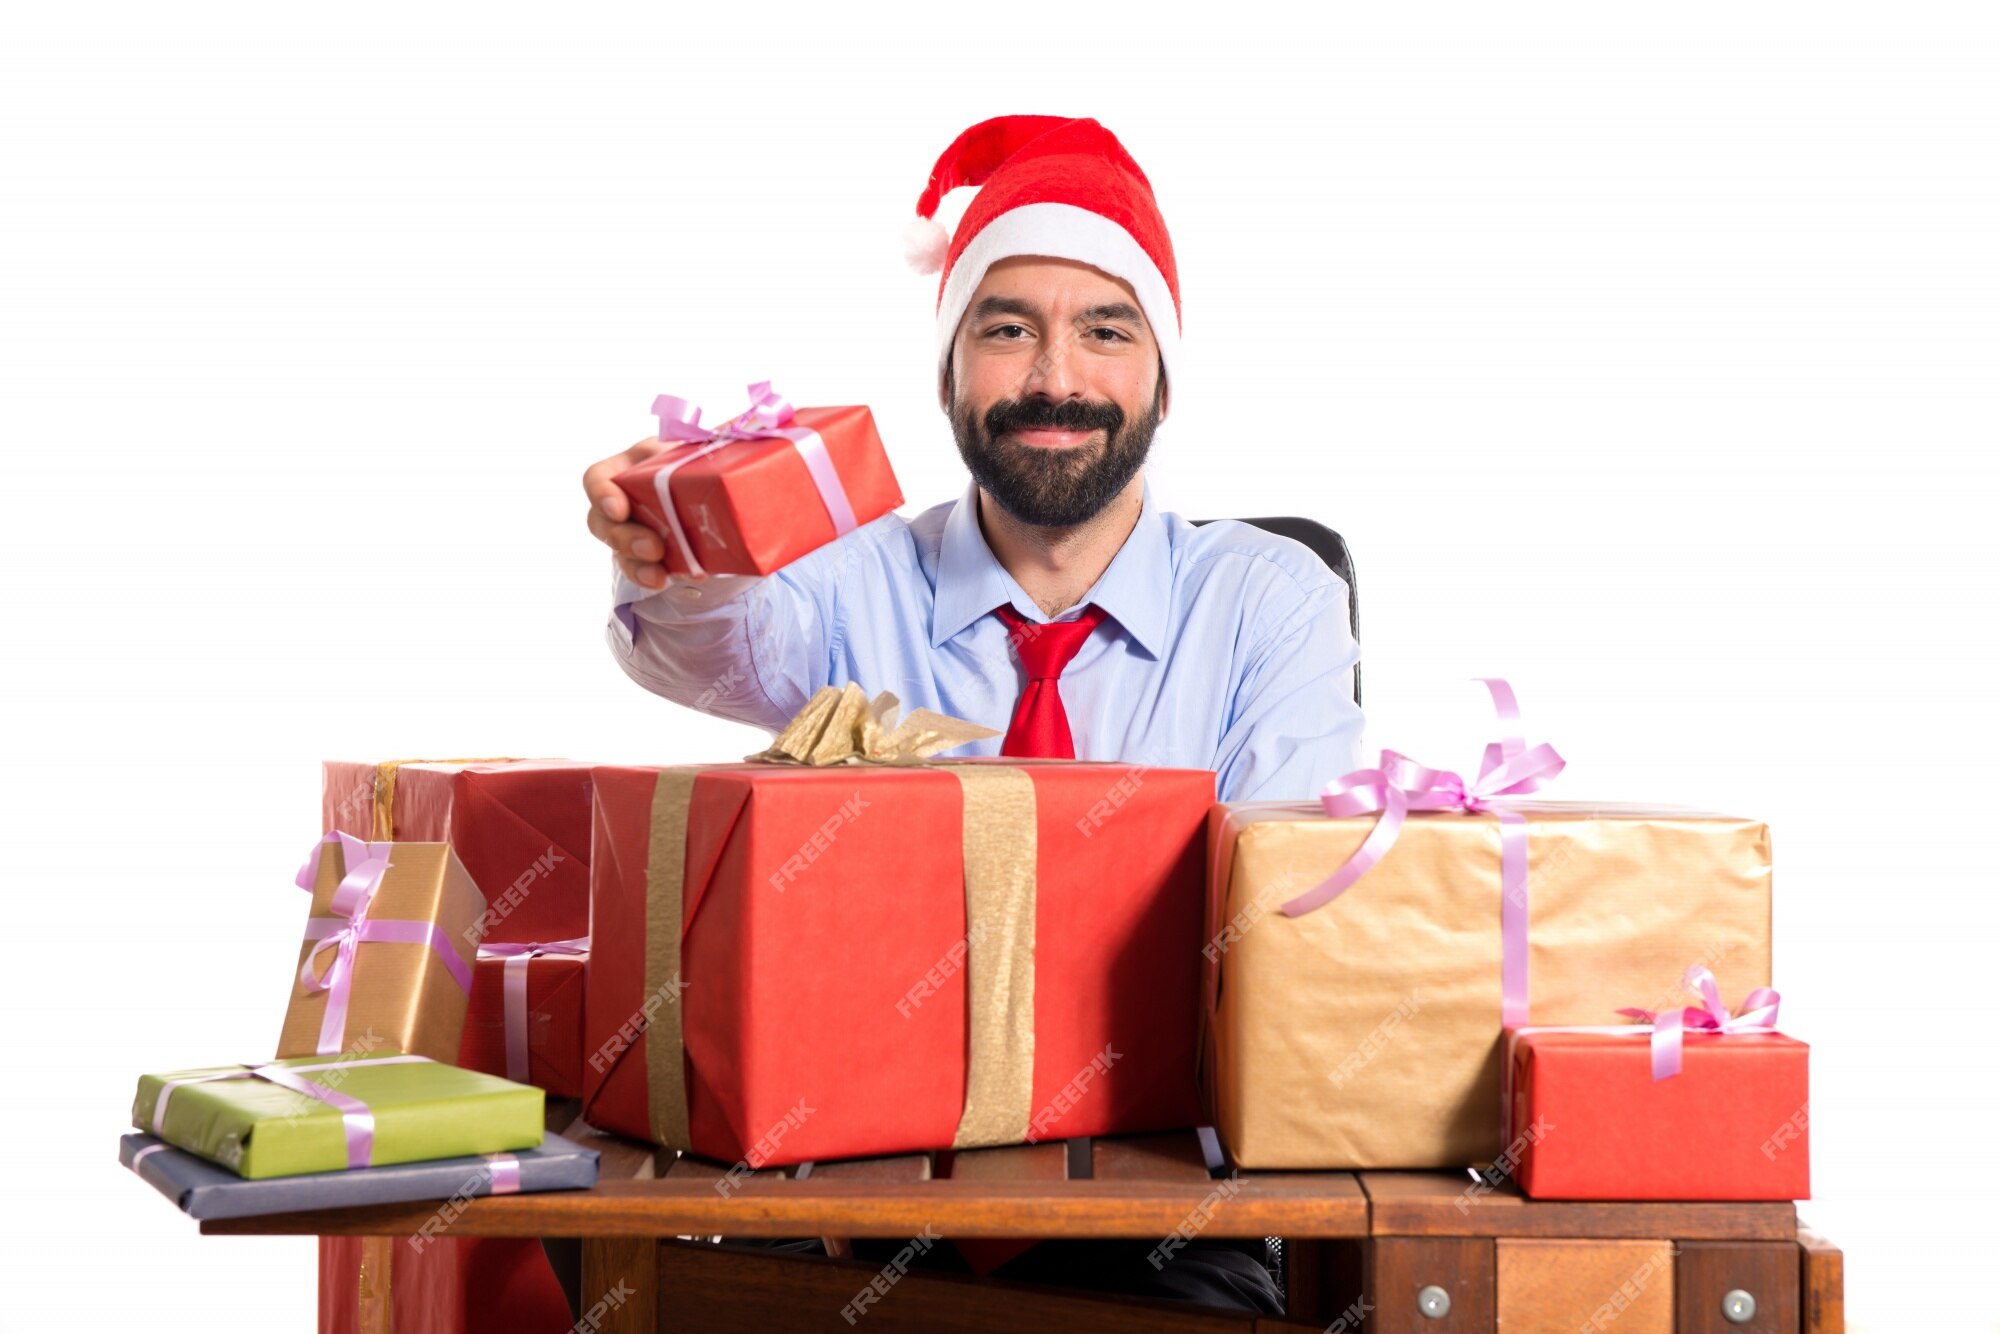 https://img.freepik.com/free-photo/christmas-man-his-office-with-several-gifts_1368-4685.jpg?w=2000